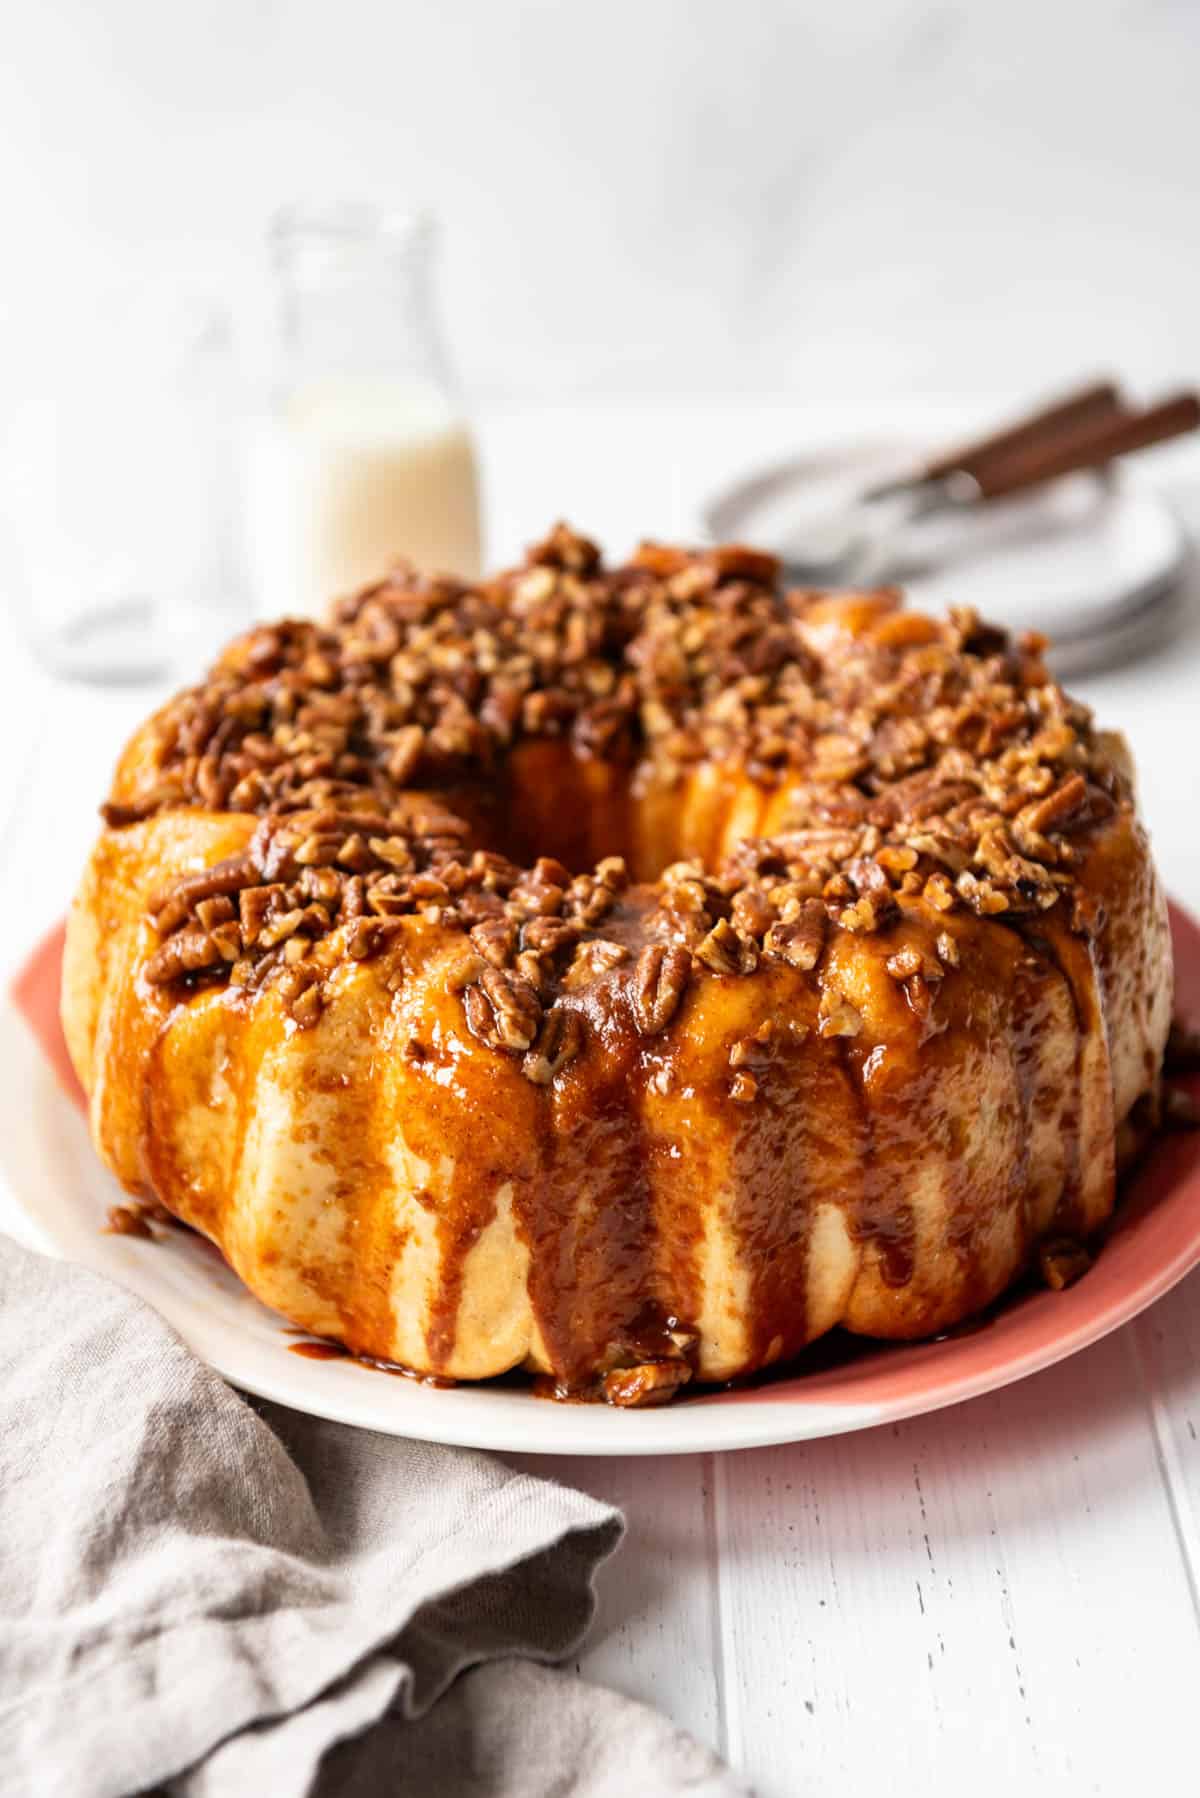 An image of caramel pecan monkey bread on a serving plate.